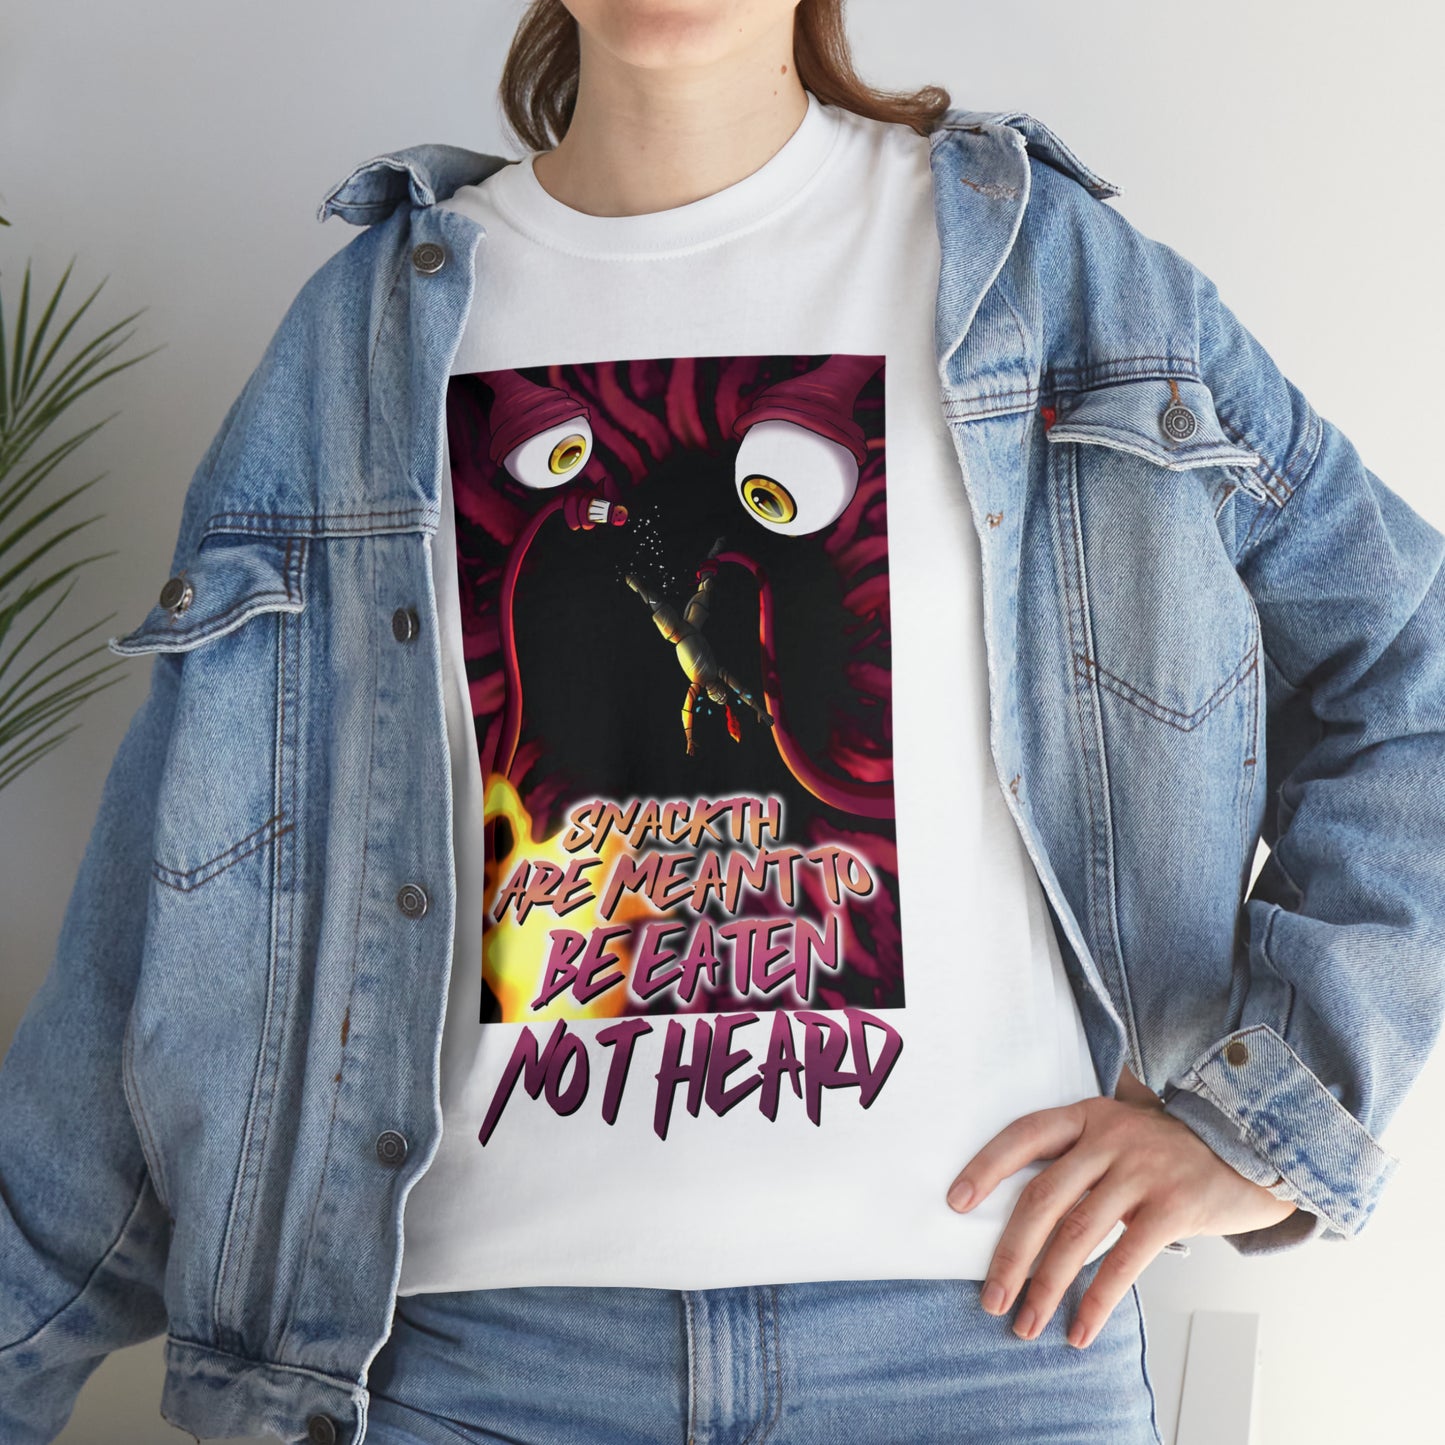 'Snackth Are Meant To Be Eaten Not Heard' Lou Carcoilh Unisex T Shirt